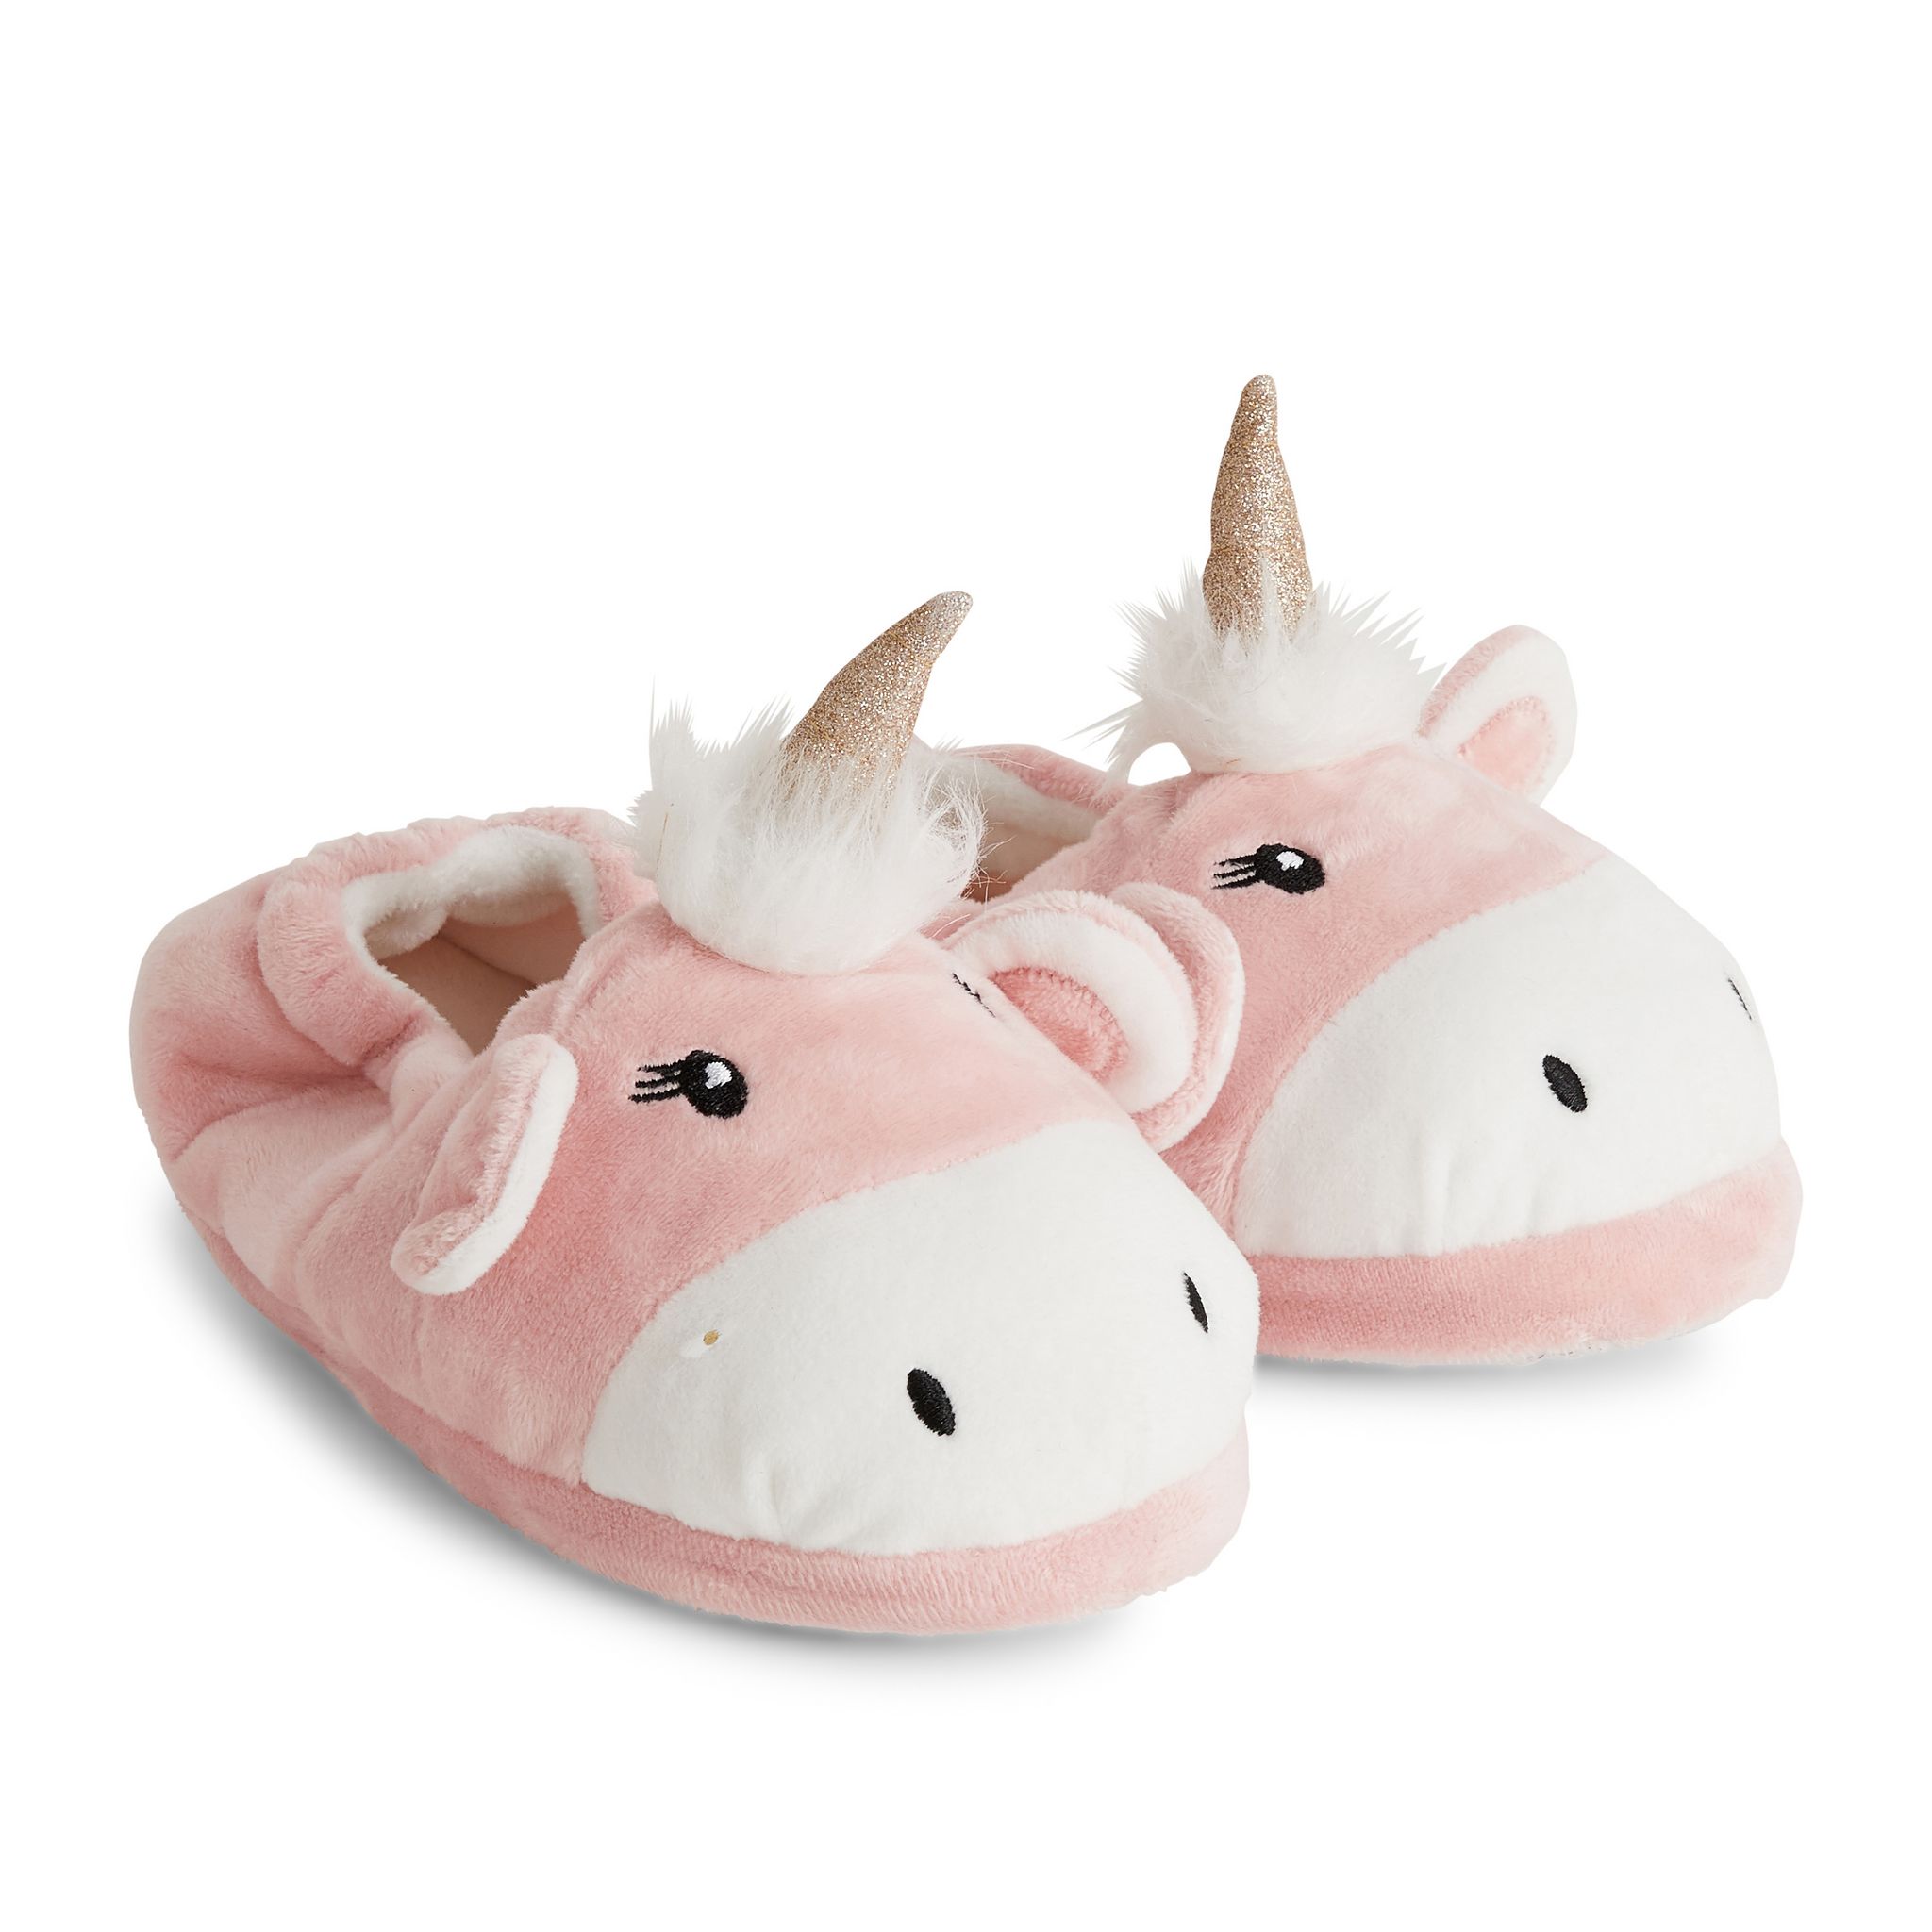 Chausson licorne fille t 28/29 - In Extenso - Auchan | Beebs